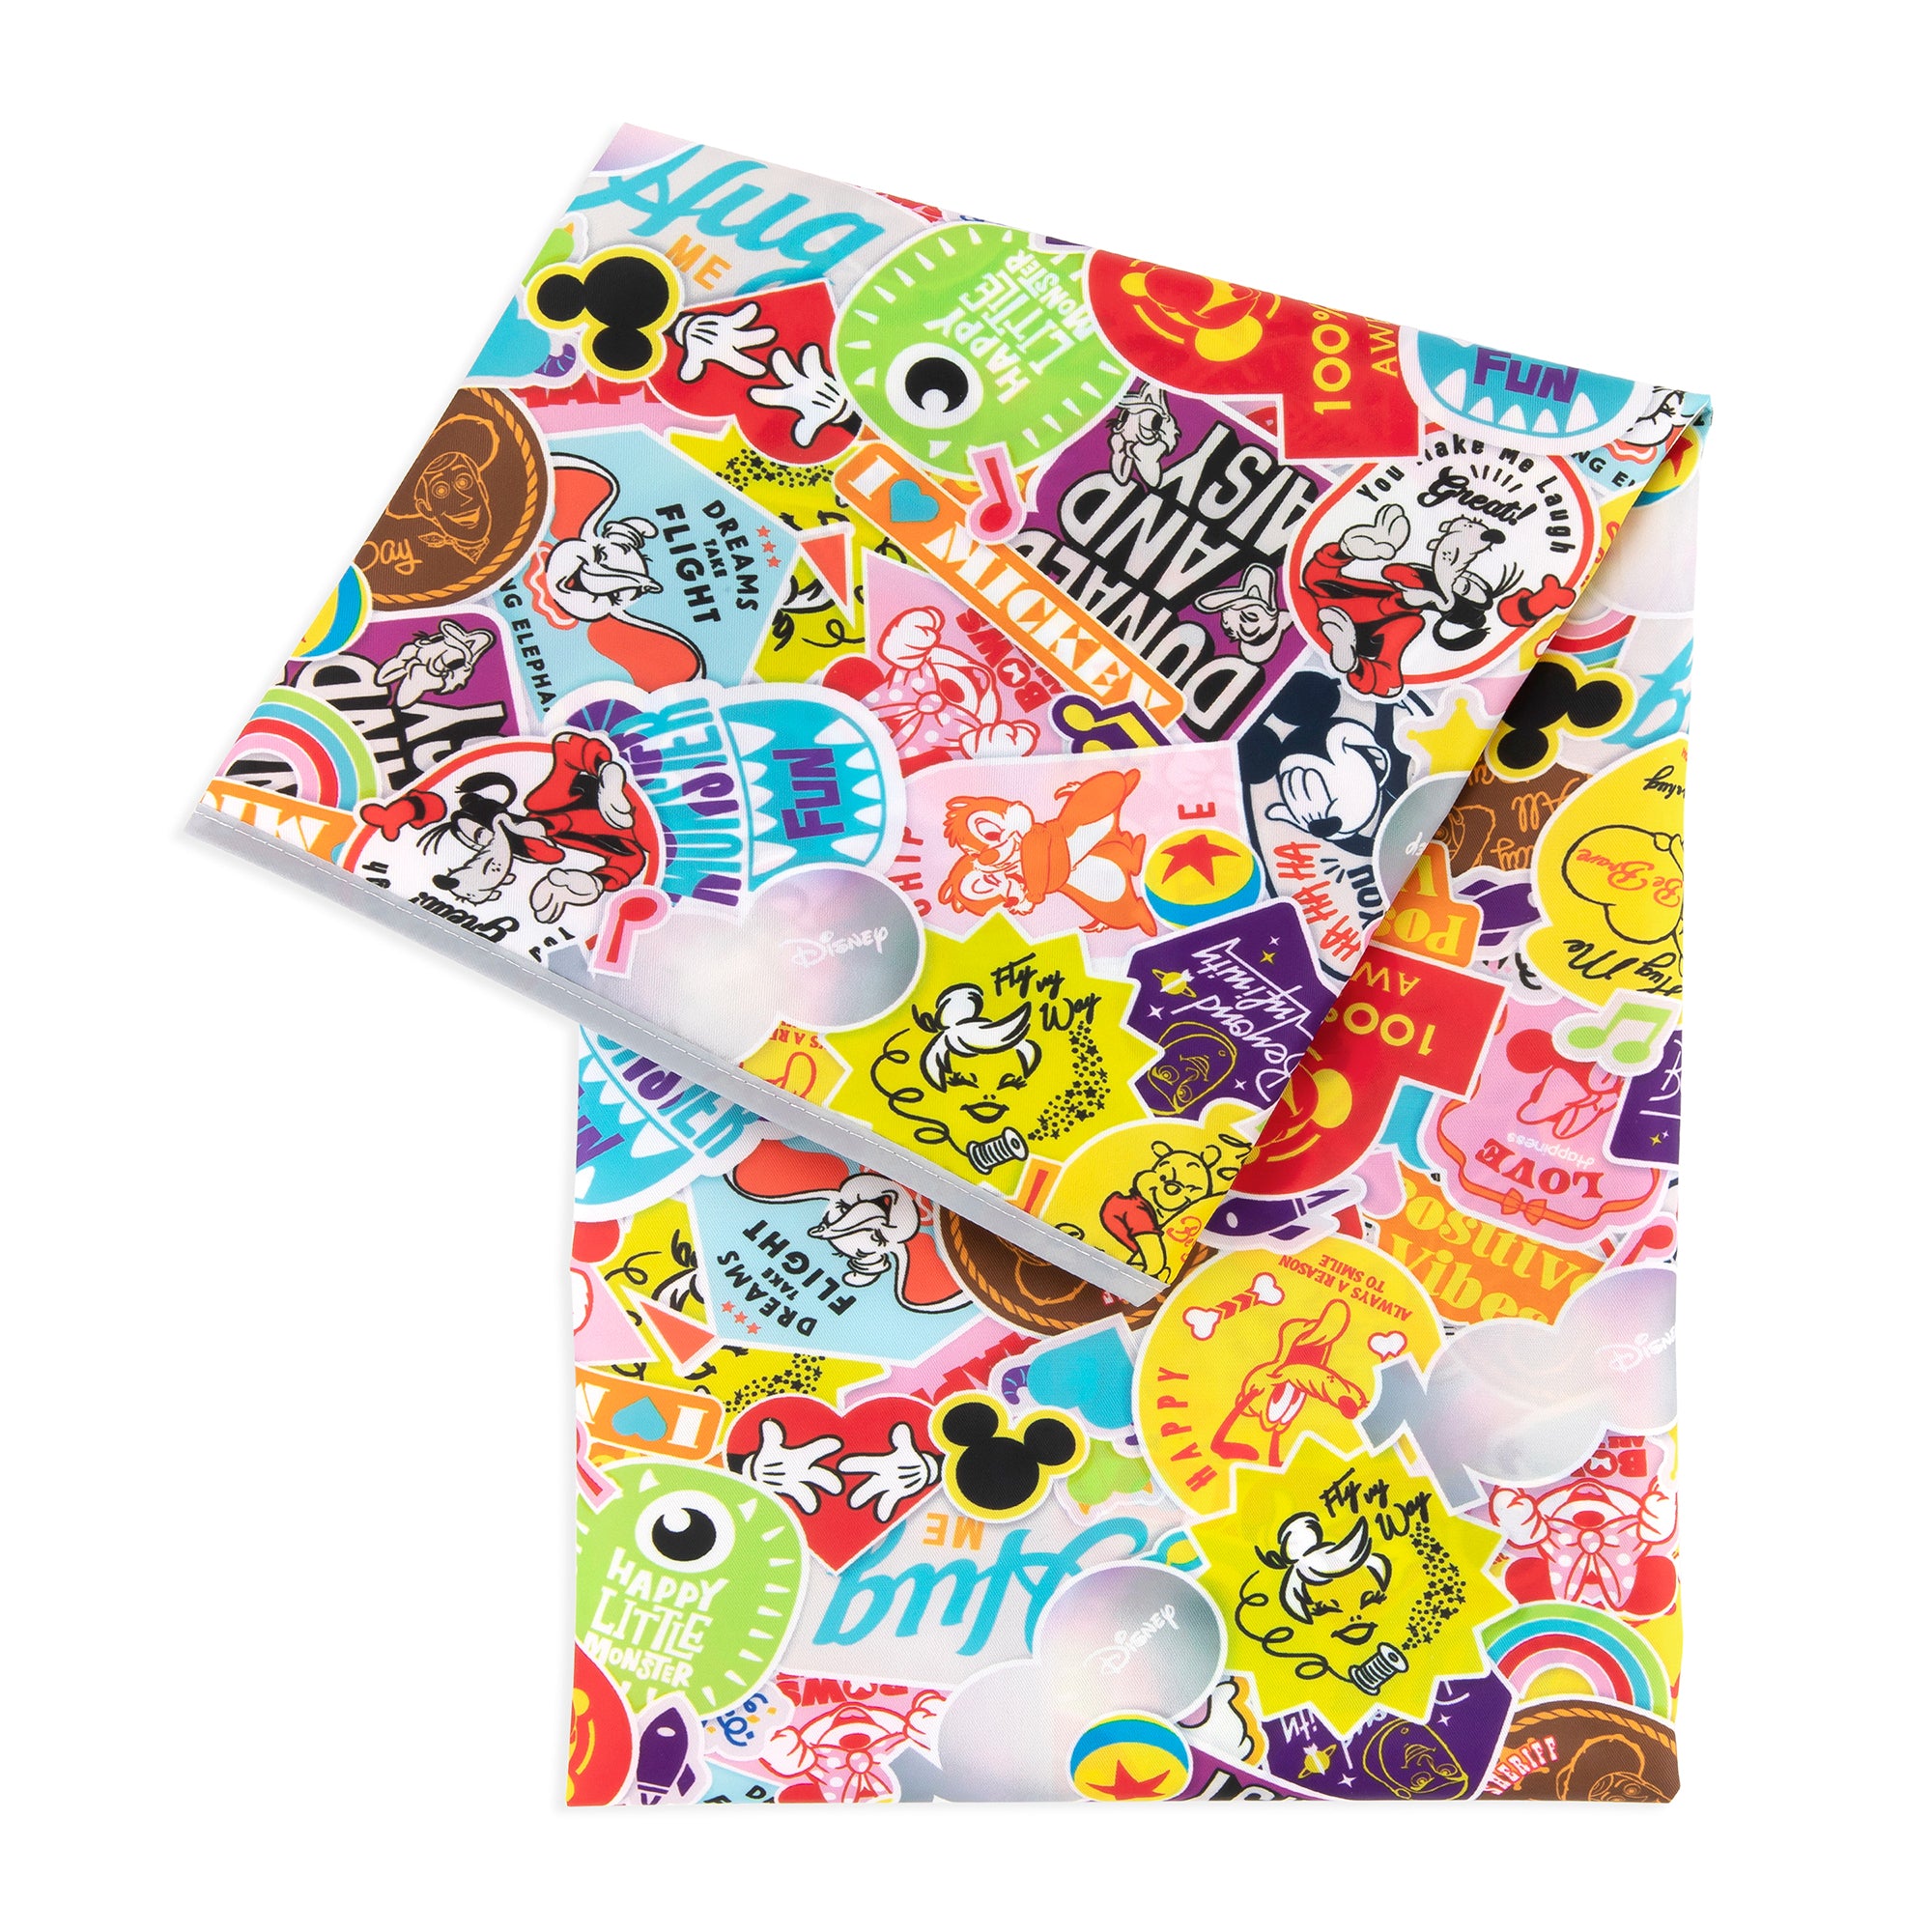 READY 2 LEARN Messy Mat - Splat Mat for Kids - Protect Tables and Floors -  Waterproof - Reusable and Lightweight - 60”L x 60”W